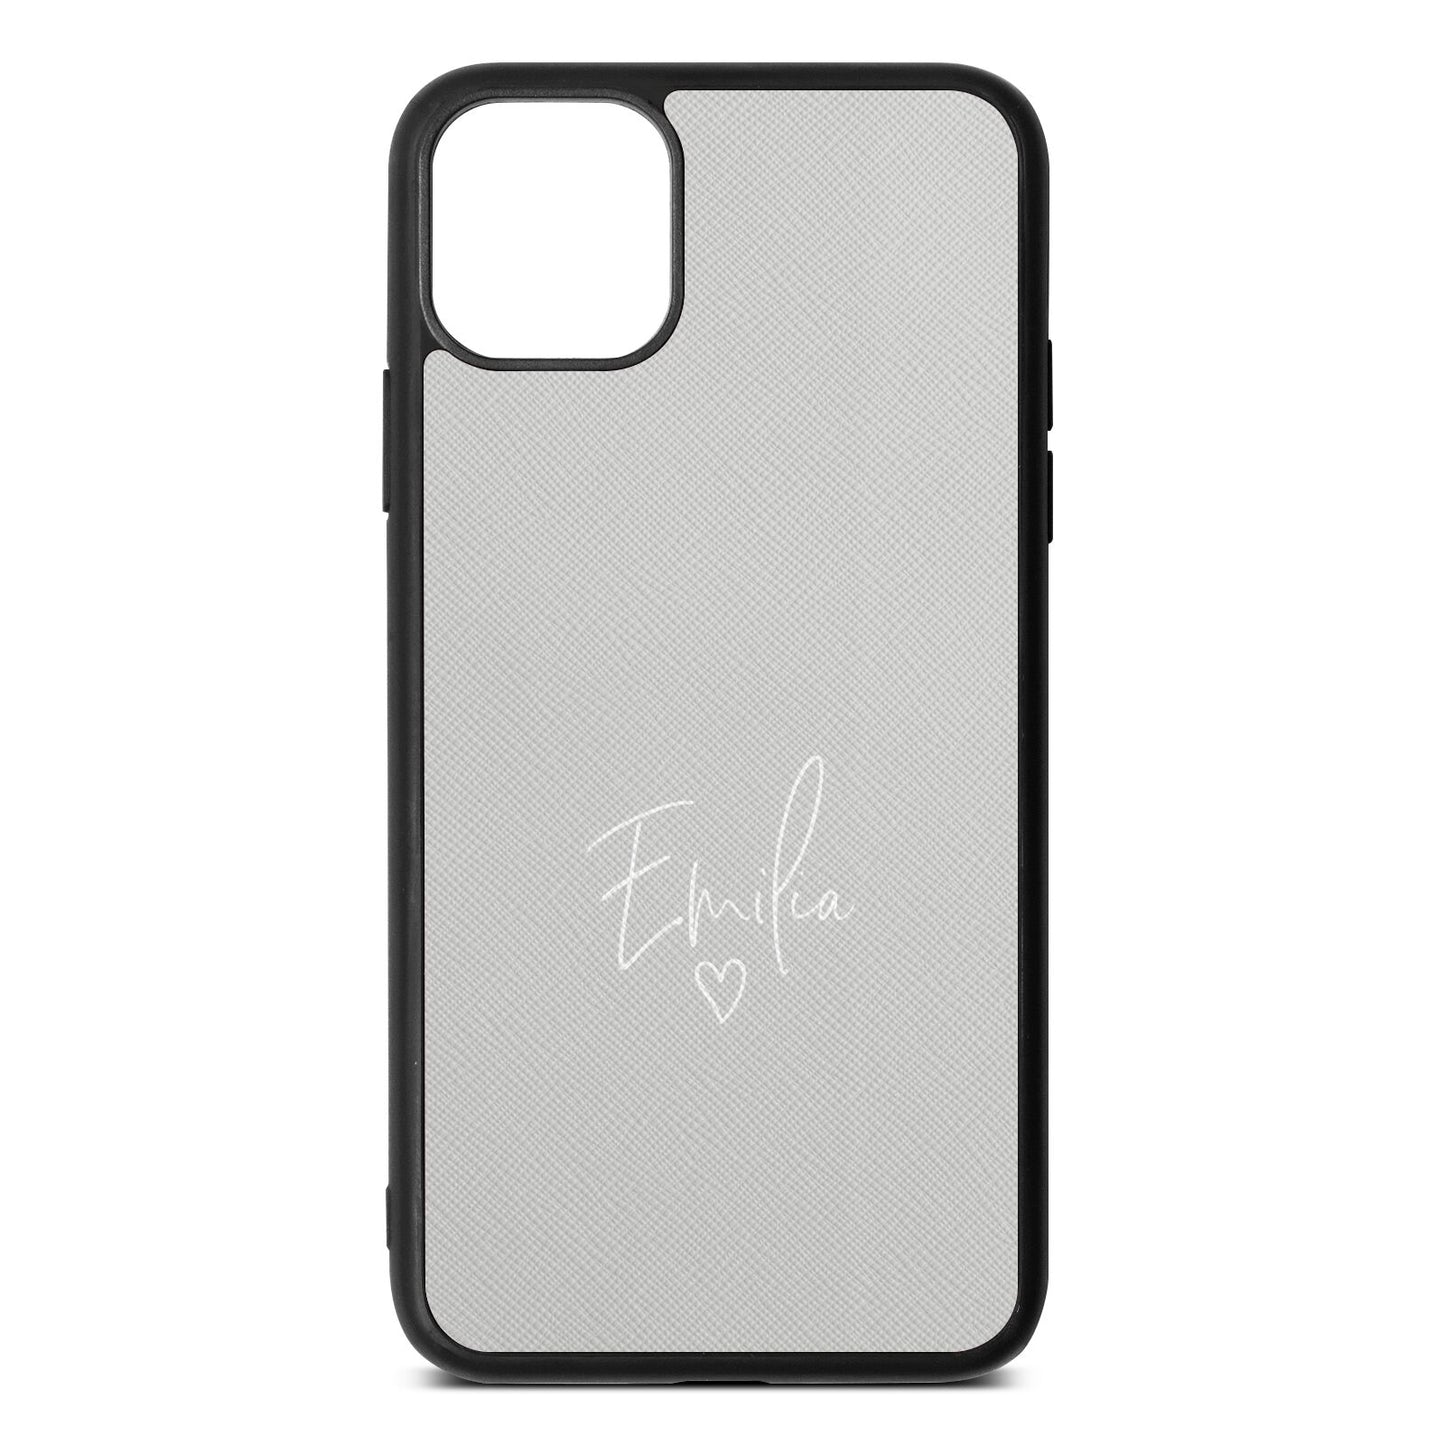 White Handwritten Name Transparent Silver Saffiano Leather iPhone 11 Pro Max Case